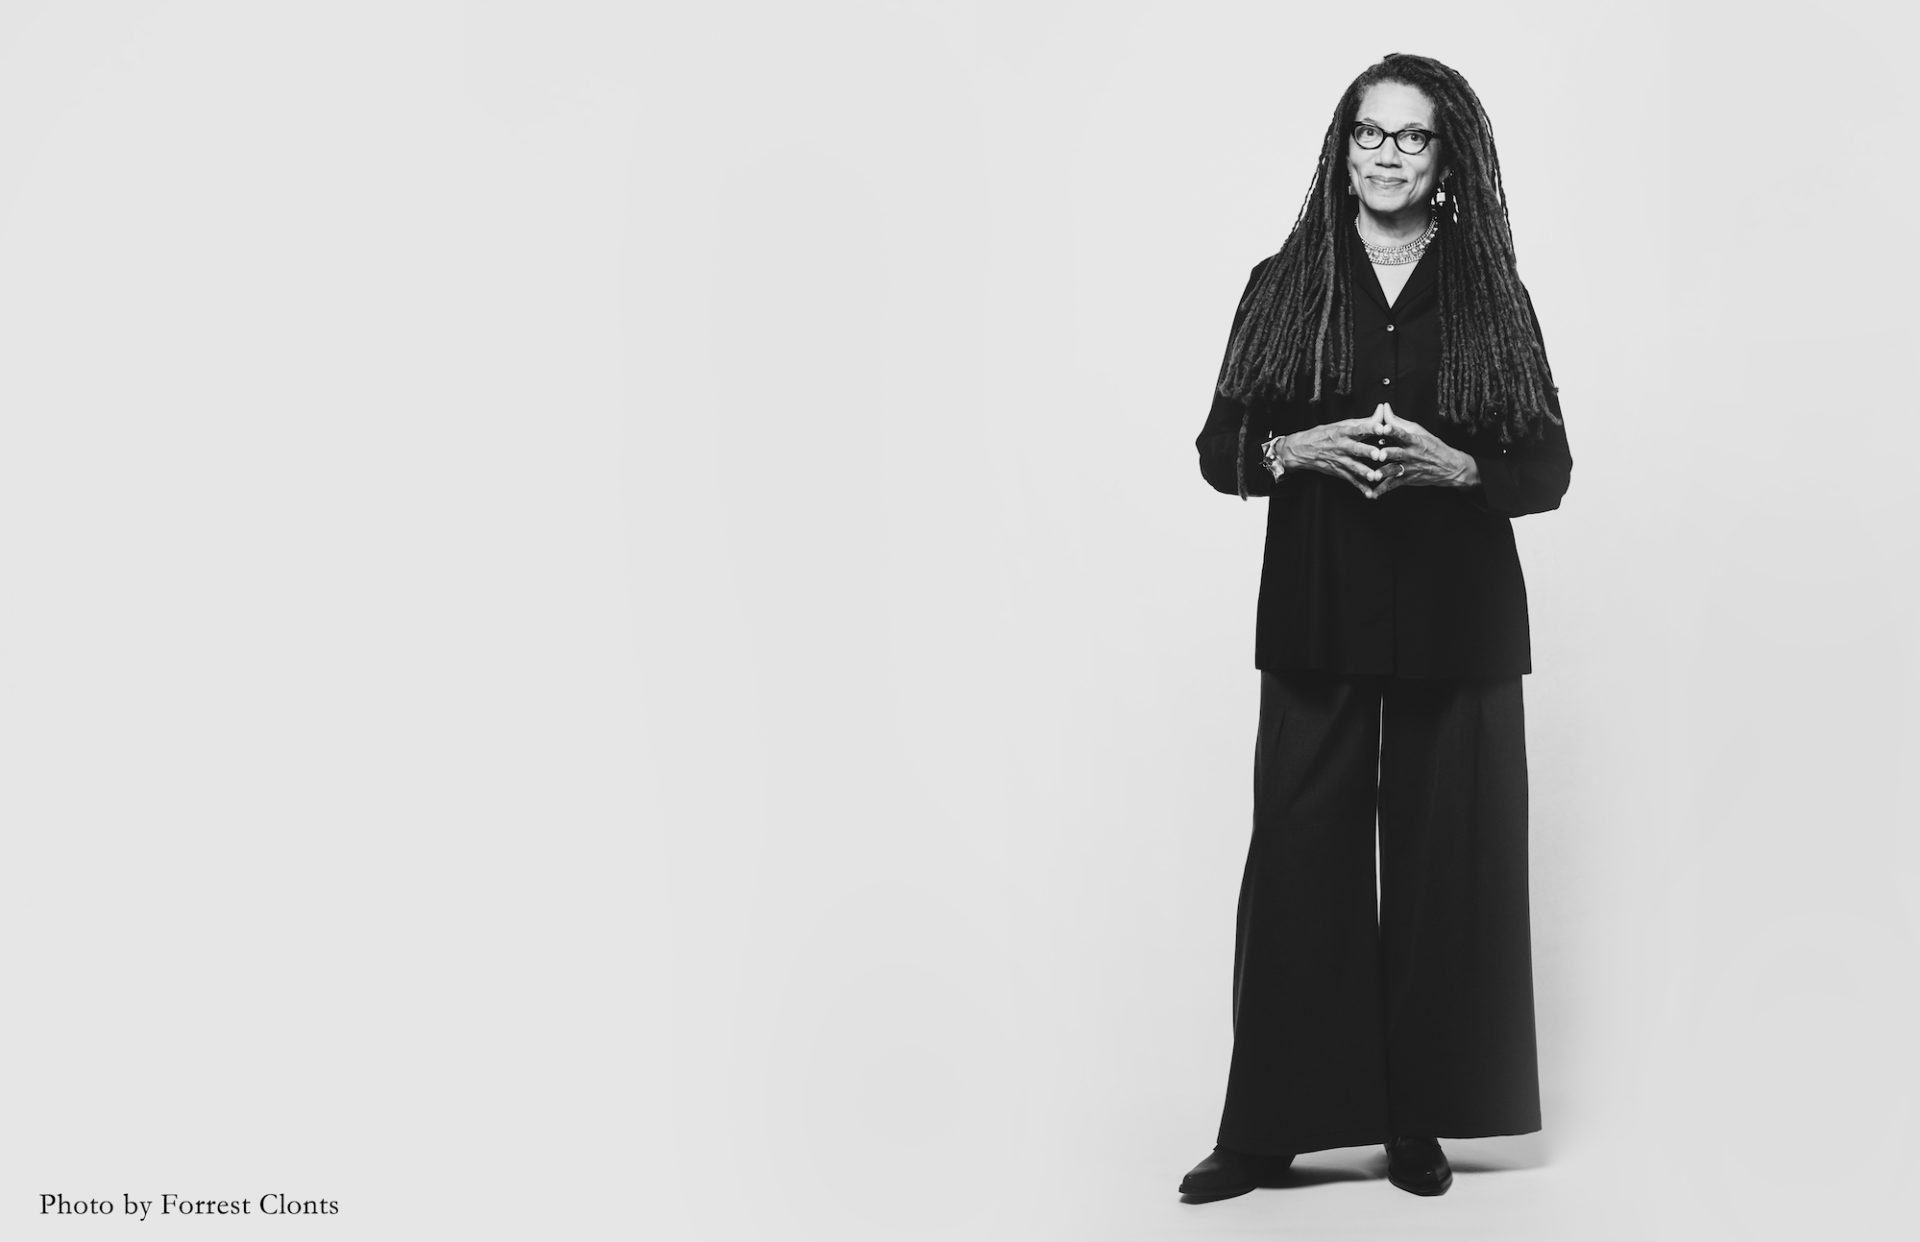 Nikky Finney stands on the right side against a plain white background. She wears black wide -legged pants and a long sleeve black top. Her arms are bent with hands touching in the middle. She has dreadlocks extending to her waist.